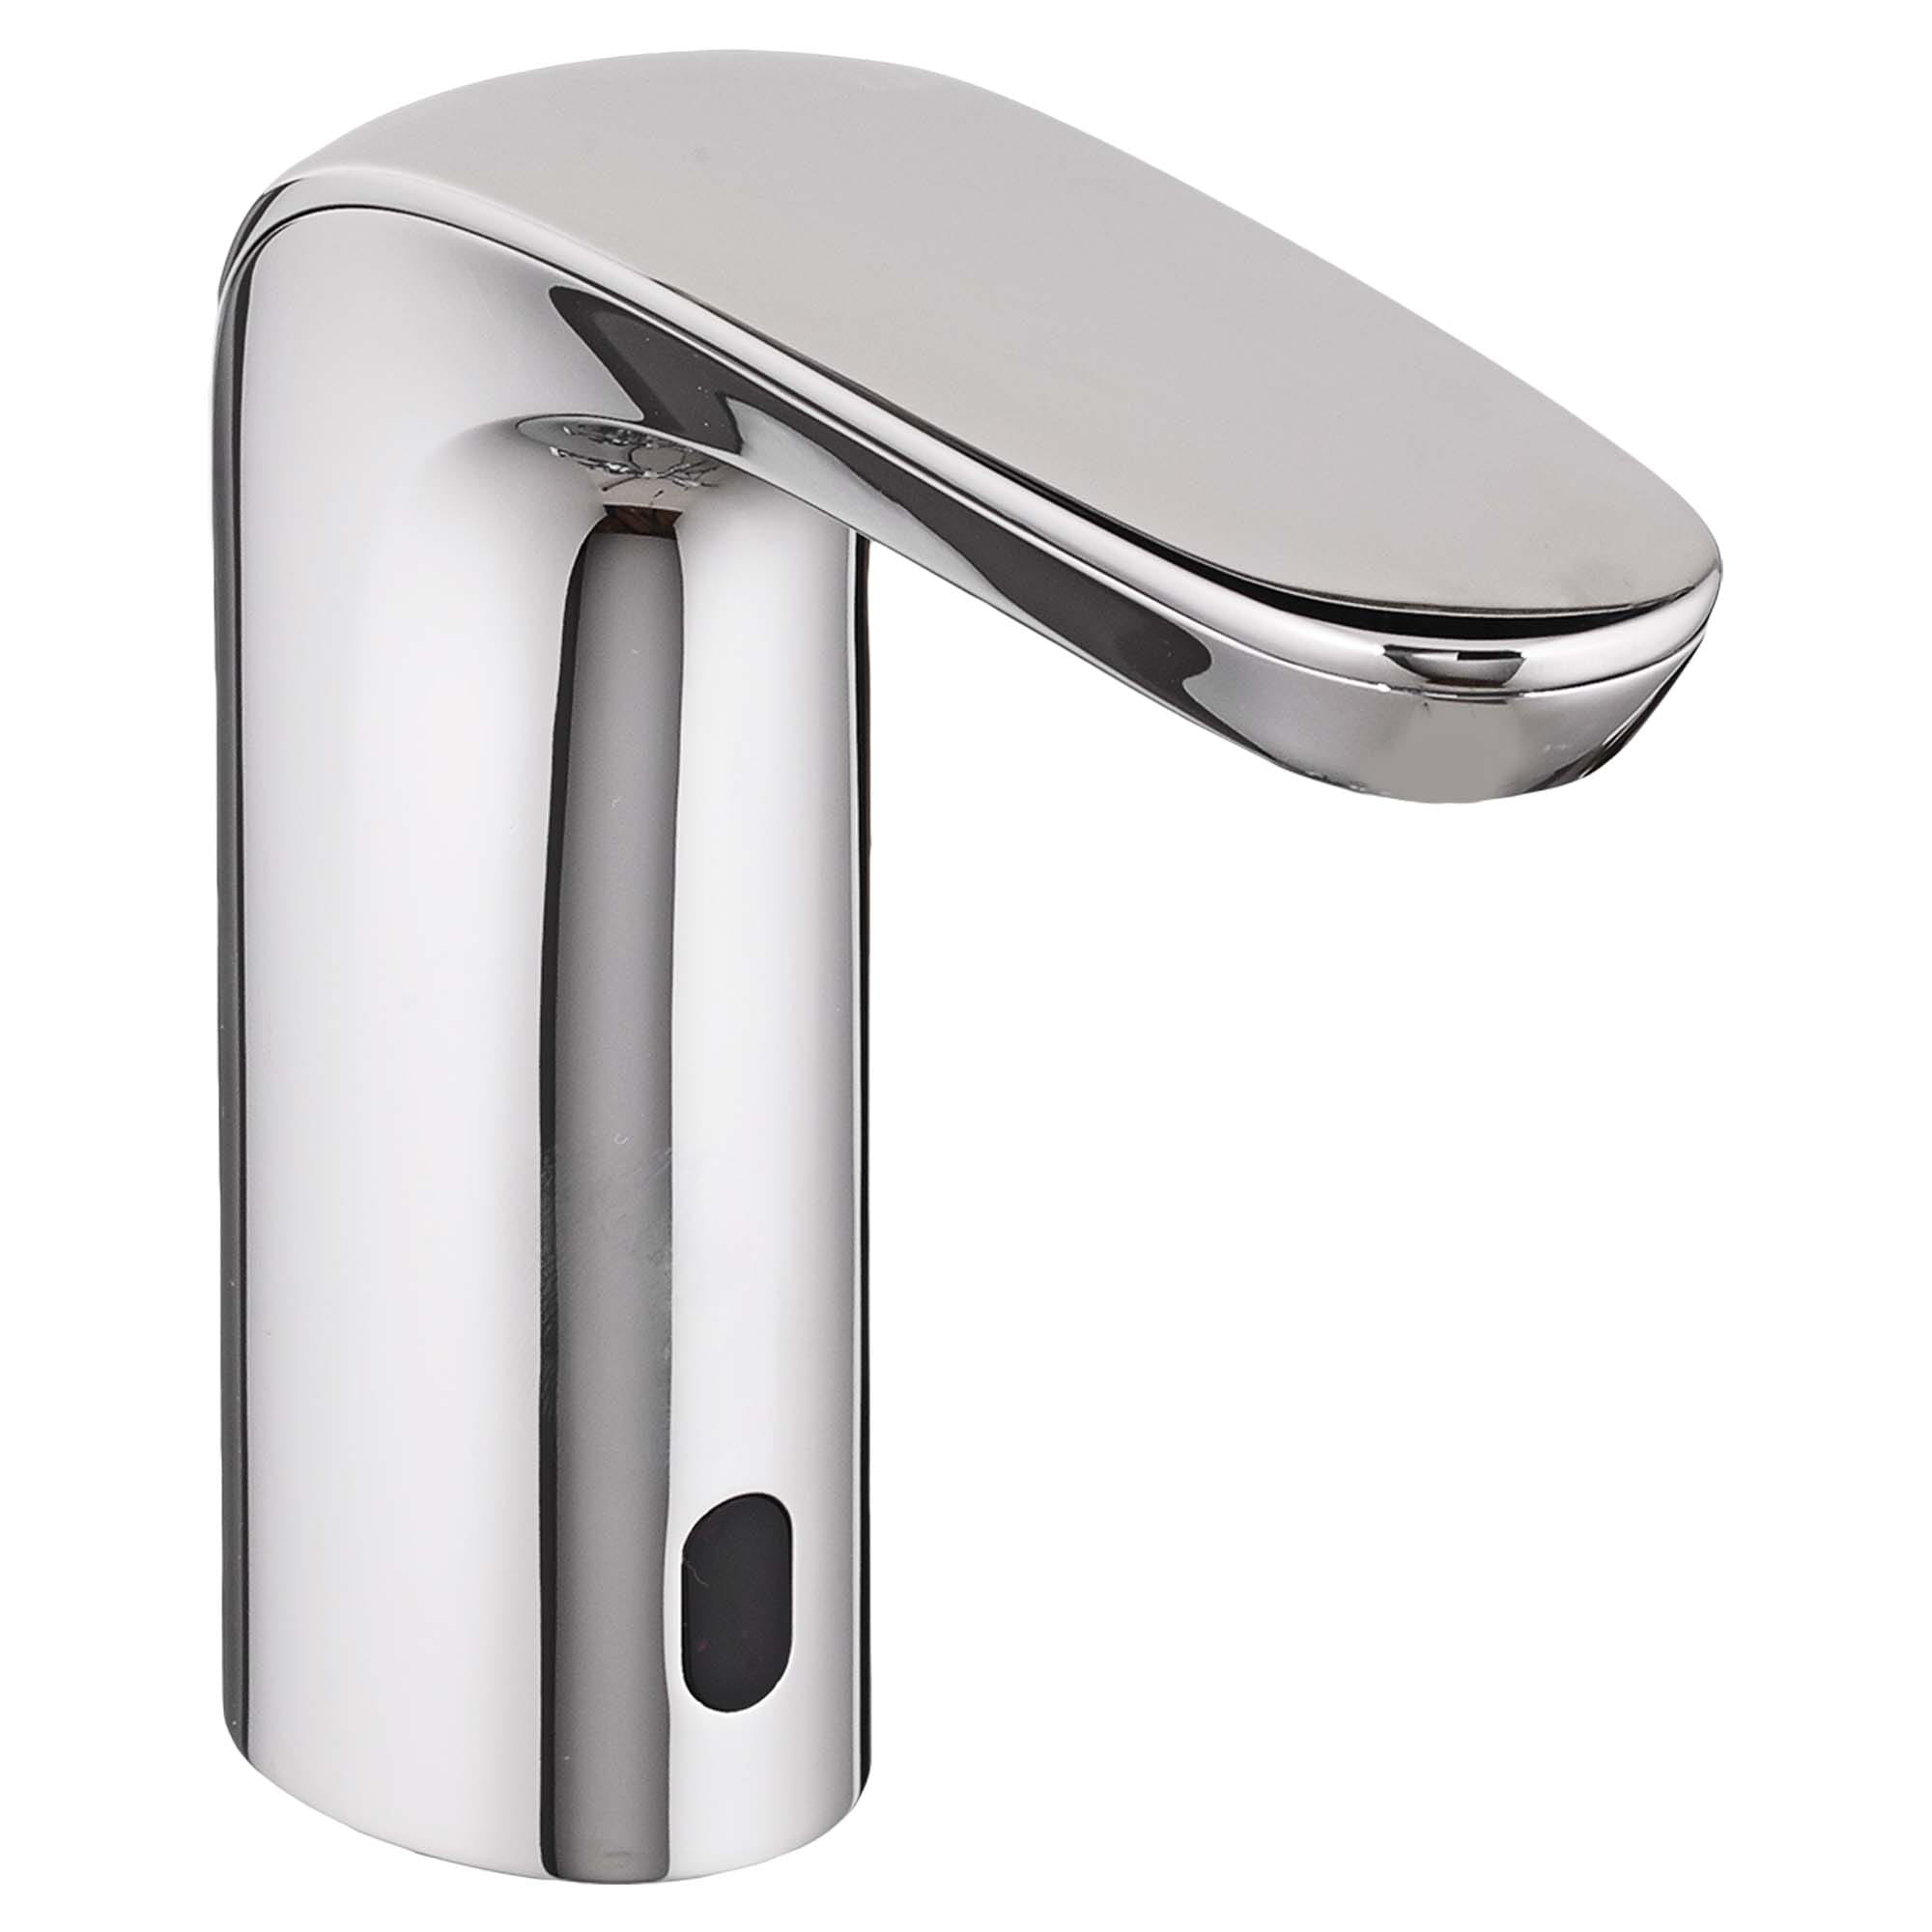 NextGen Selectronic Touchless Faucet Battery Powered 15 gpm 57 Lpm CHROME